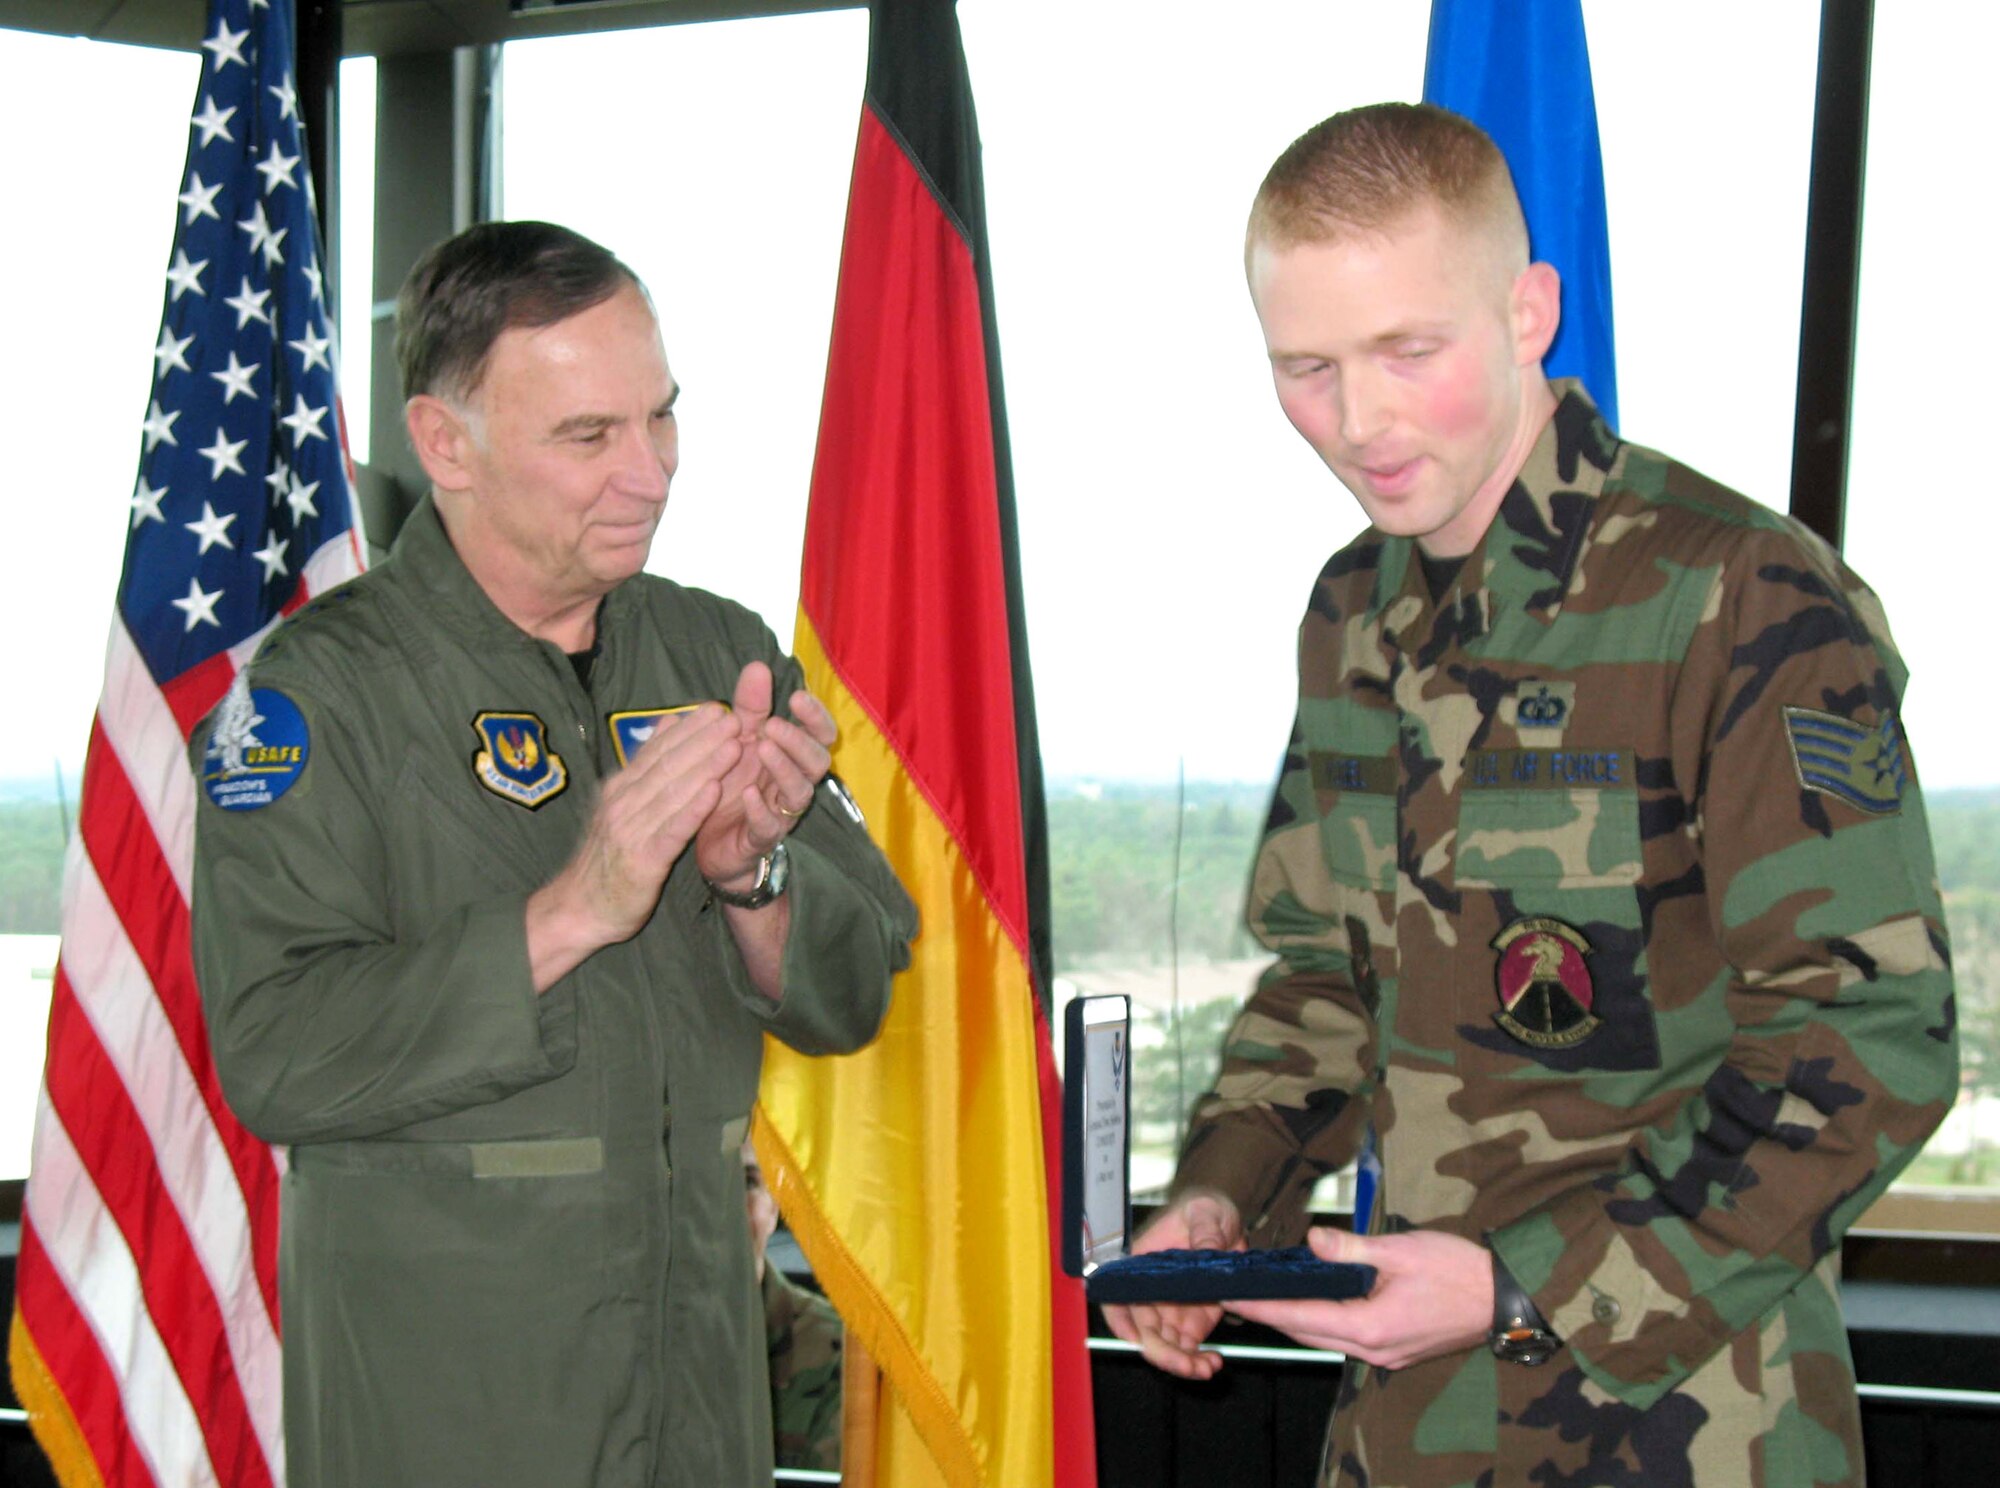 Gen. Tom Hobbins applauds Staff Sgt. Jess Vogel, control tower watch supervisor, who was one of three tower workers to be presented an Airman Committed to Excellence award. General Hobbins, the U.S. Air Forces in Europe commander, presented the awards March 13 during a ribbon-cutting ceremony for the new tower cab at Ramstein Air Base, Germany. (U.S. Air Force photo/Staff Sgt. Jason David)